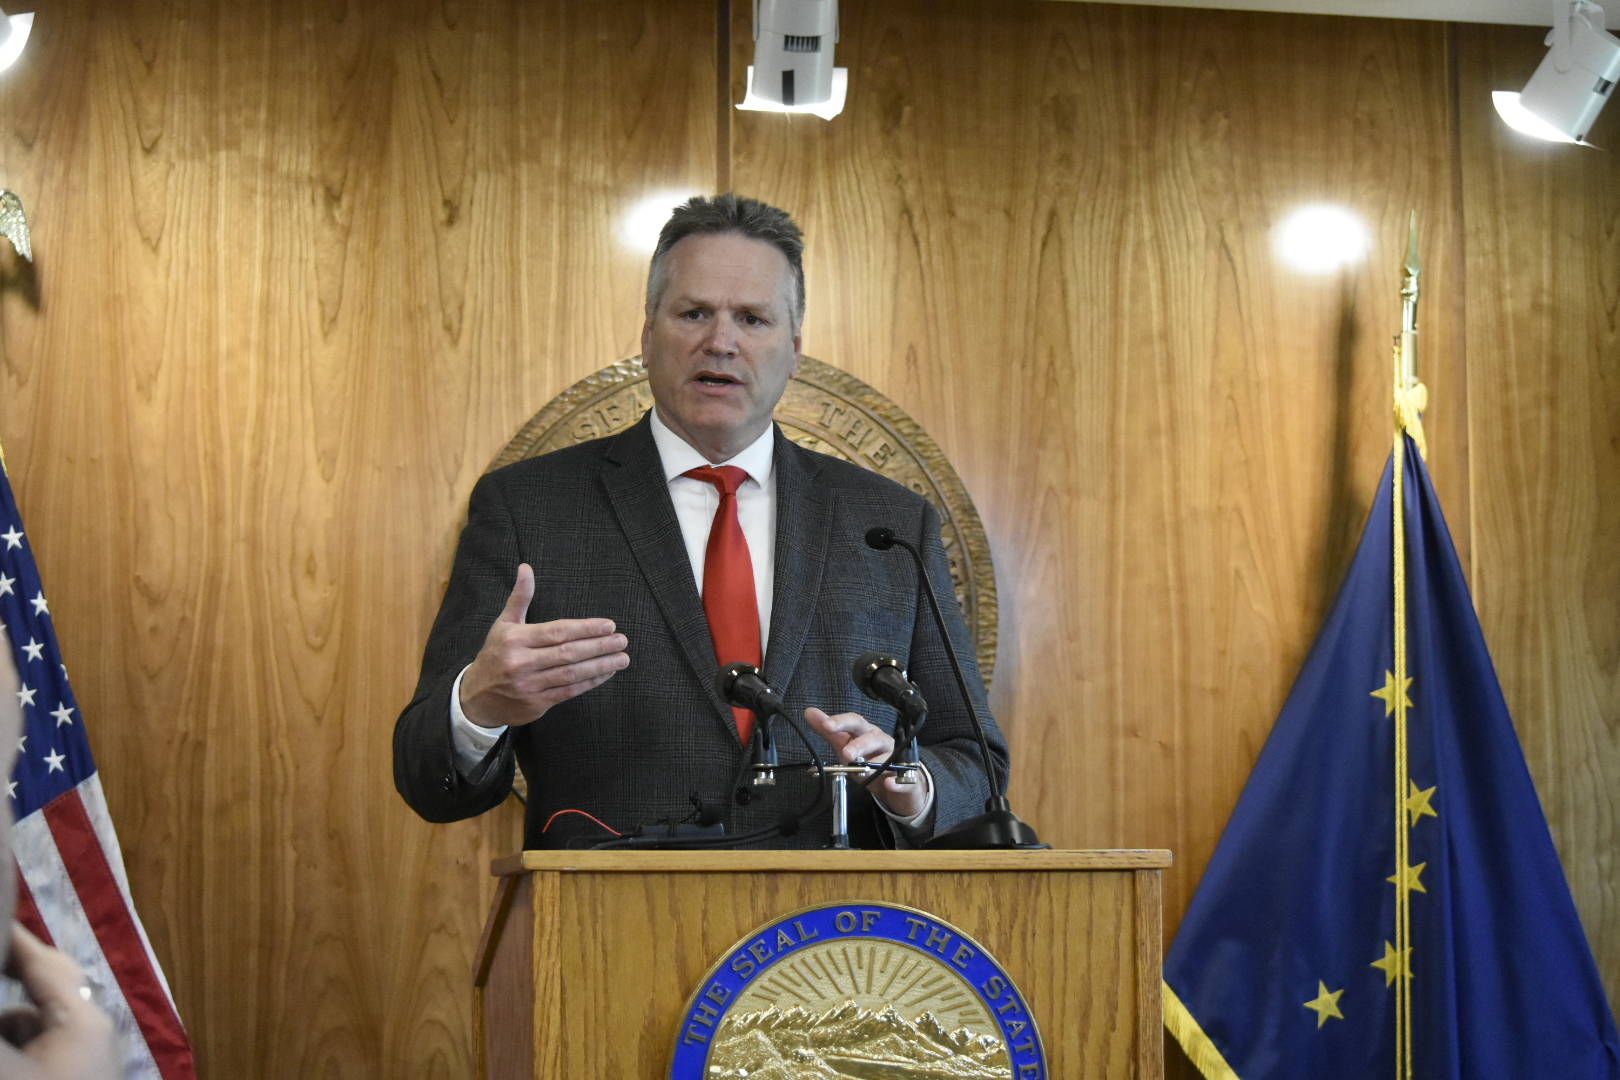 Peter Segall / Juneau Empire
Gov. Mike Dunleavy held a press conference at the Alaska State Capitol on Thursday to say he was ready to call lawmakers into yet another special session if they didn’t rectify by Friday issues with the budget passed earlier this week.